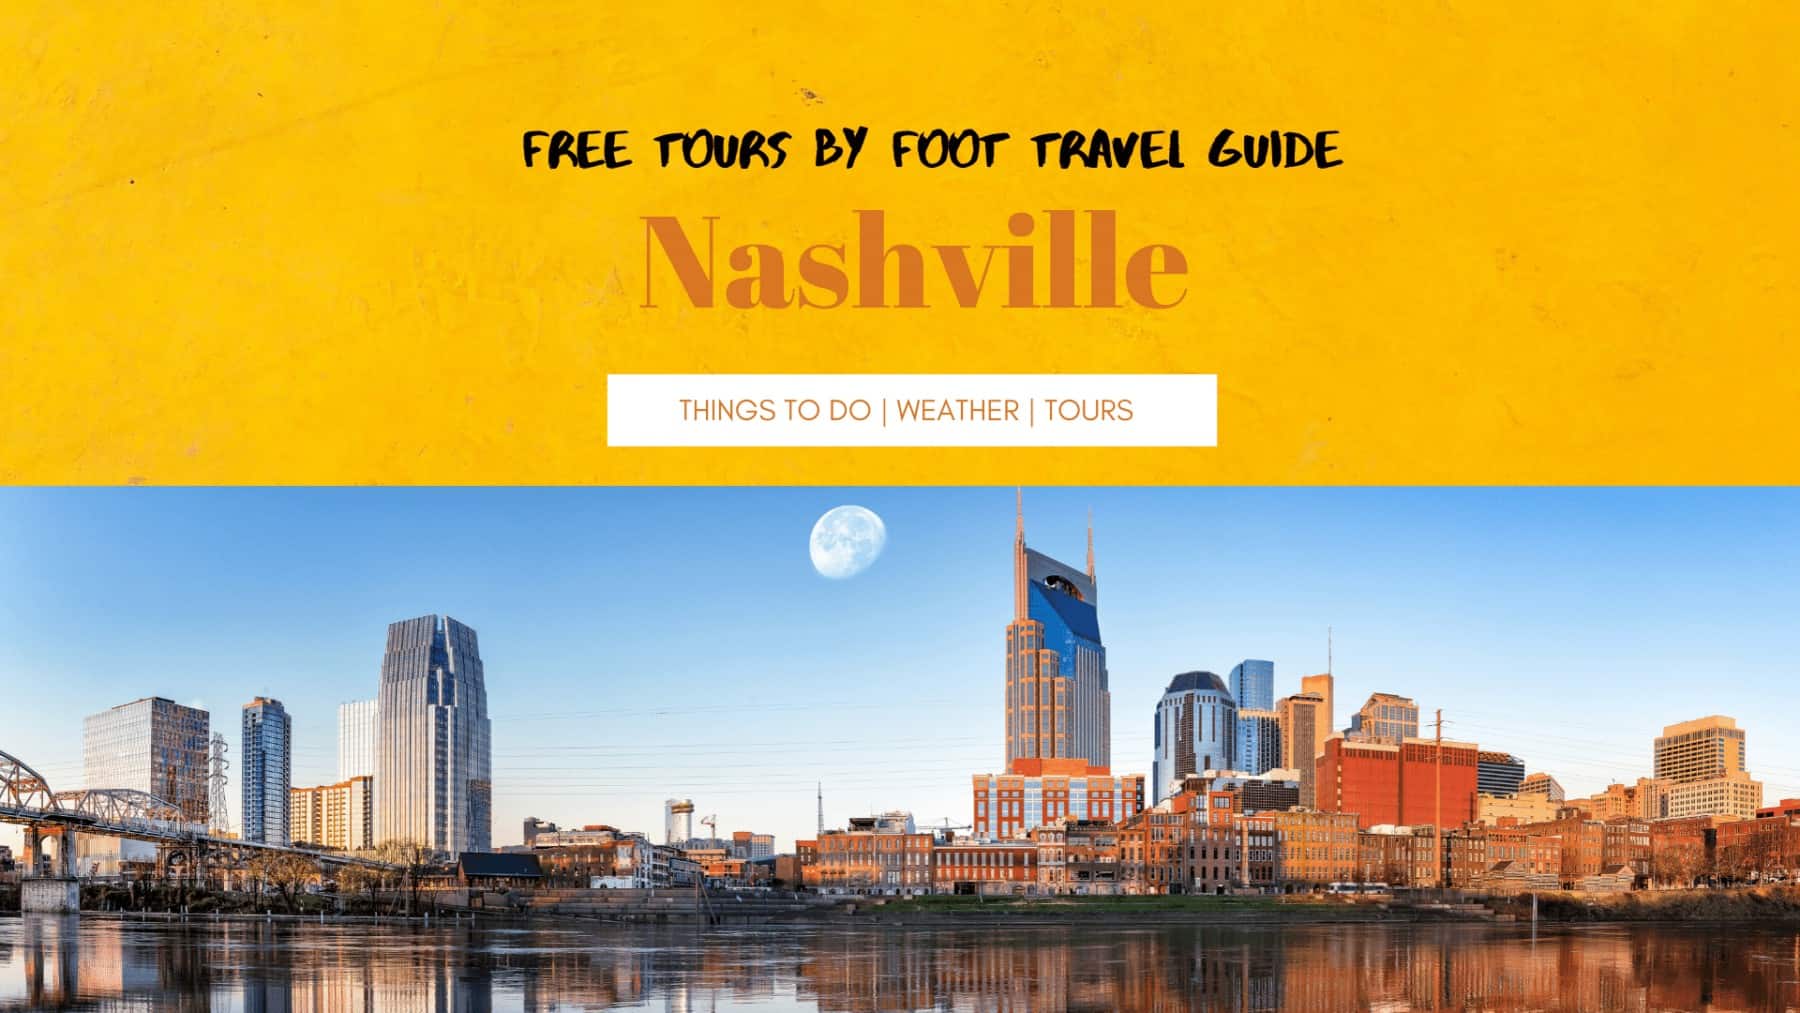 FREE-TOURS-BY-FOOT-TRAVEL-GUIDE-TO-NASHVILLE